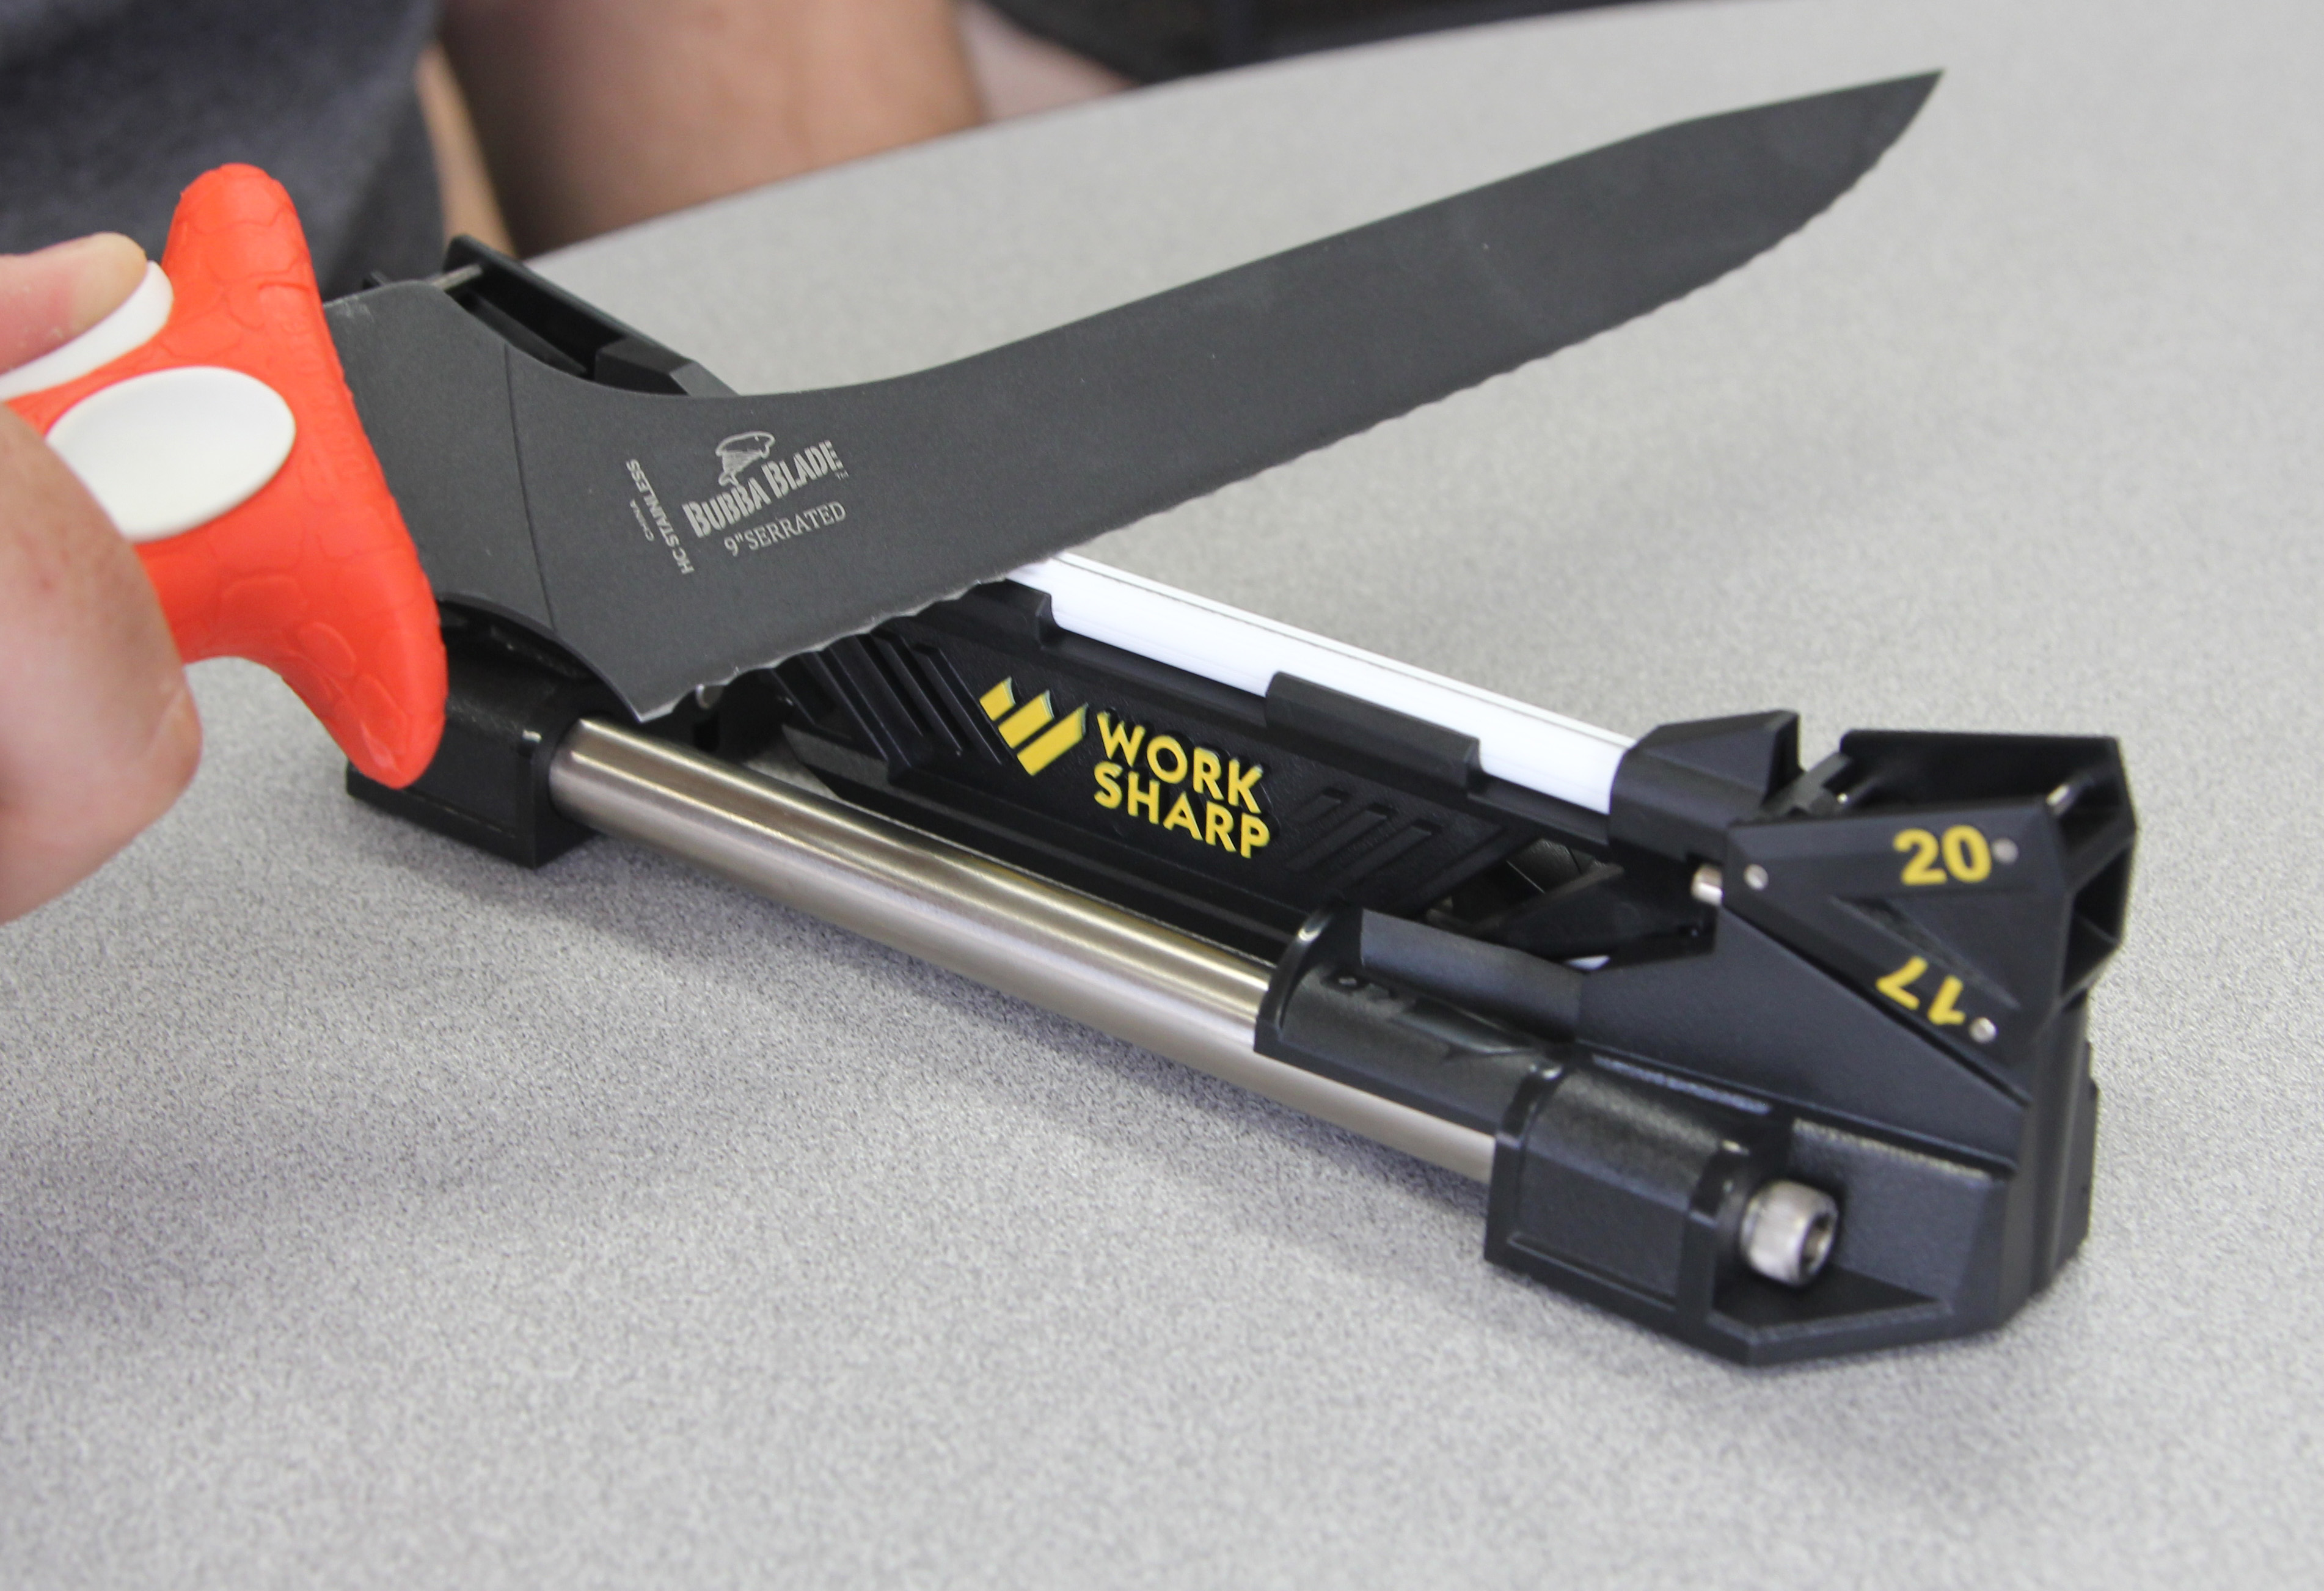 Work Sharp Guided Sharpening System